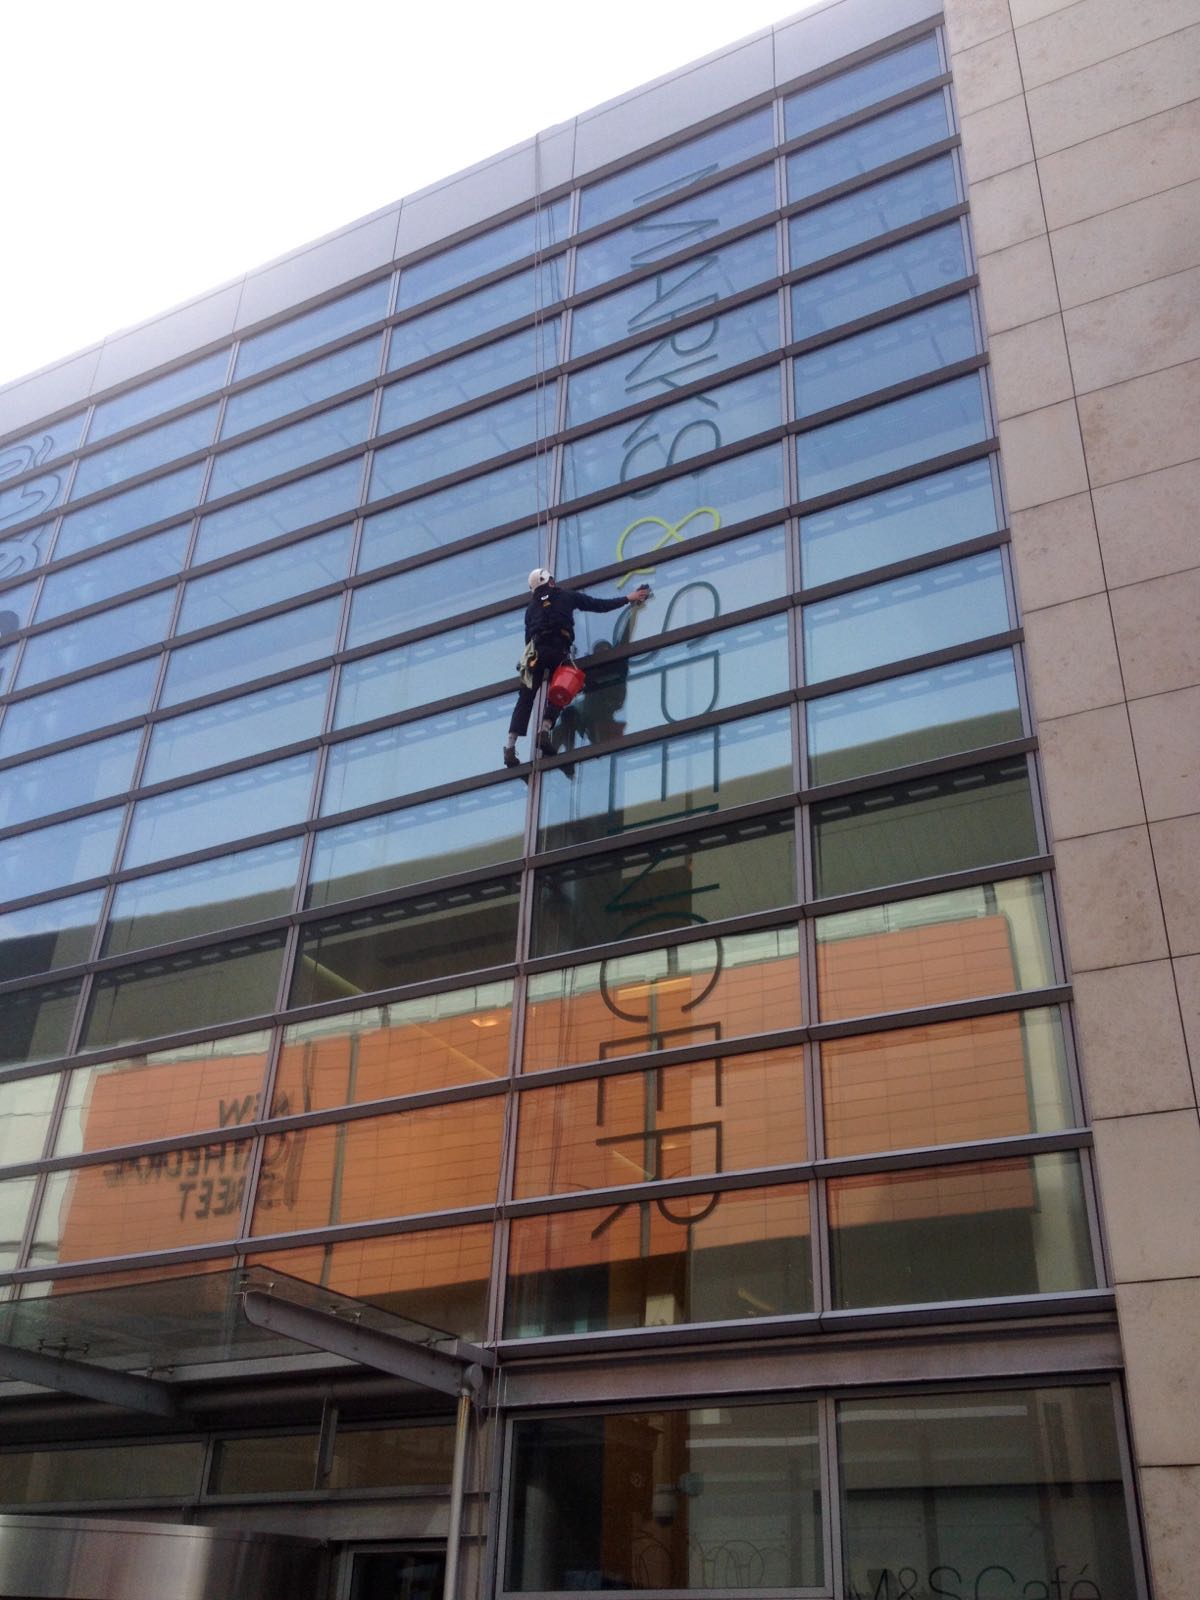 Window cleaning by abseiling